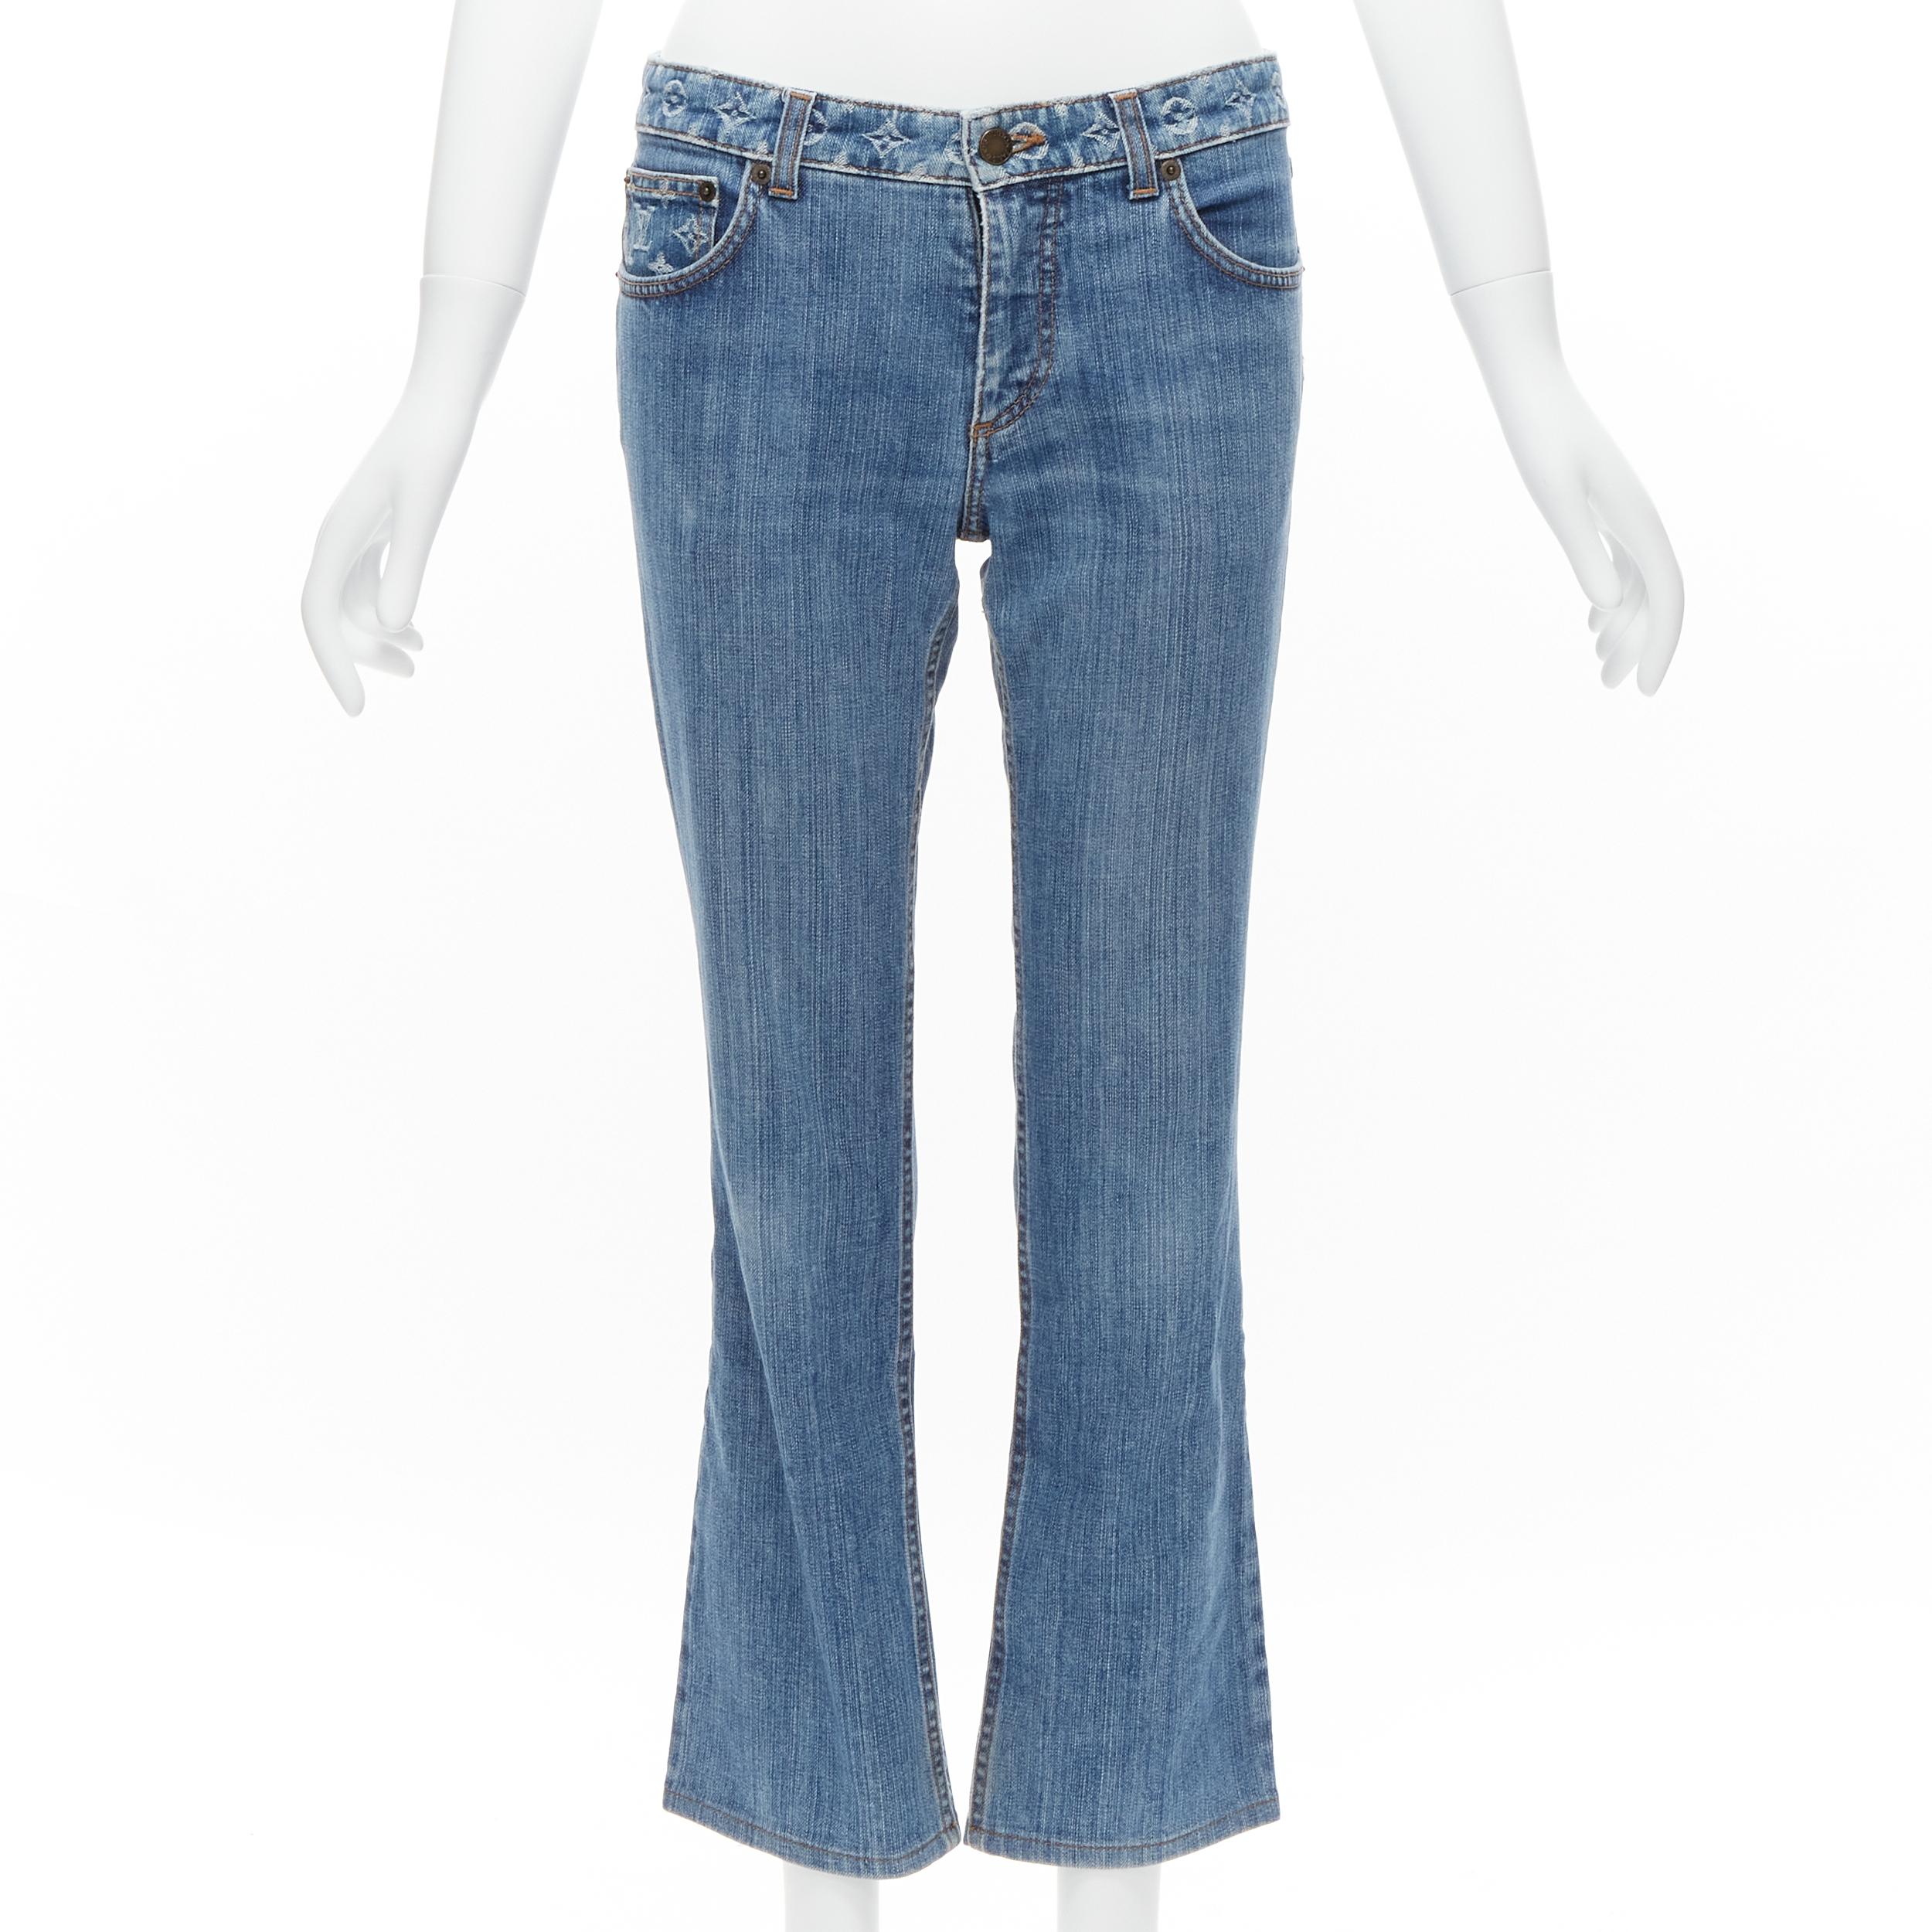 louis vuitton flared jeans